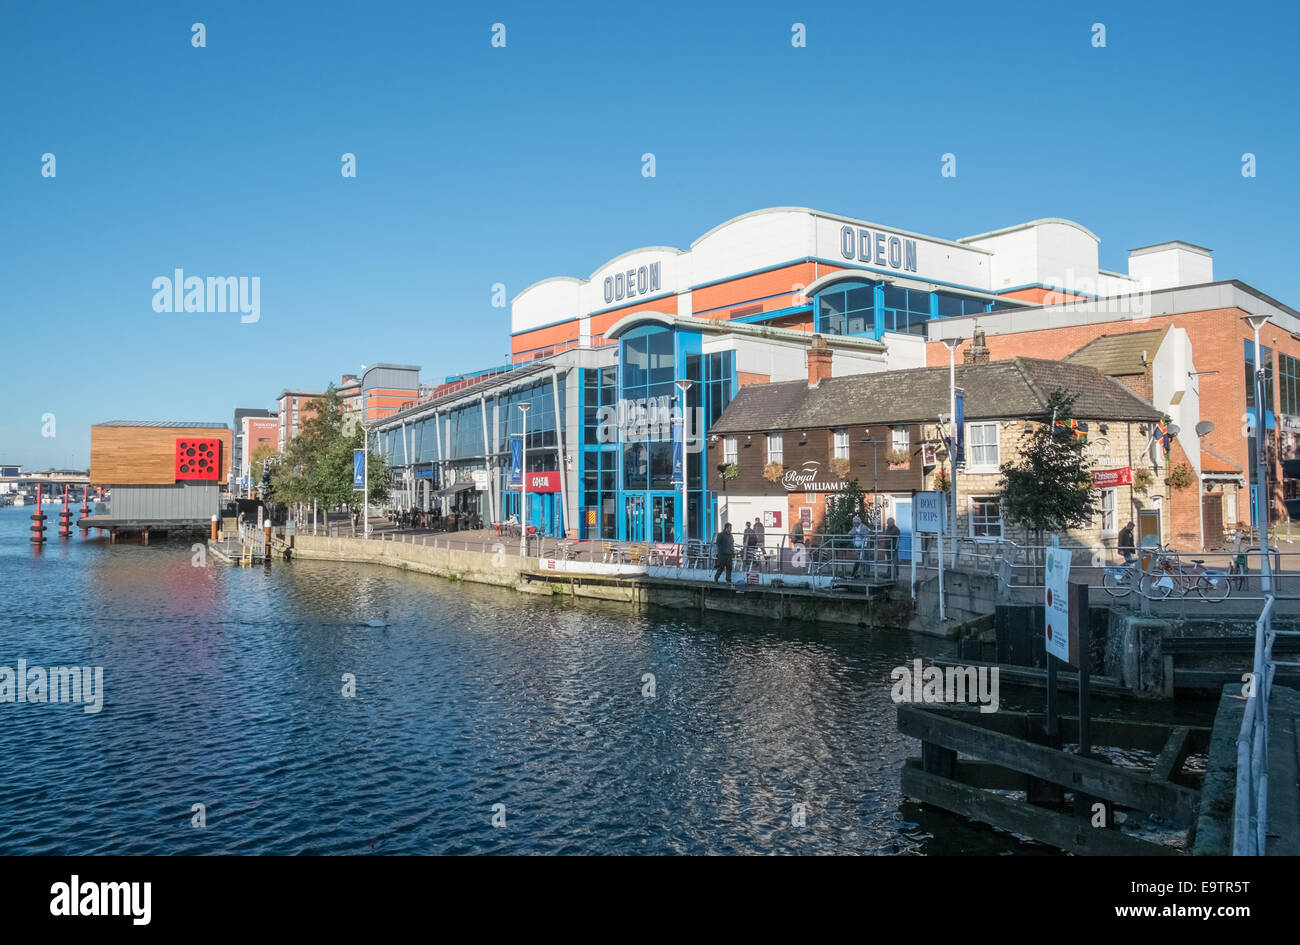 Odeon cinema and waterfront, Brayford Pool, Lincoln, Lincolnshire, England UK Stock Photo